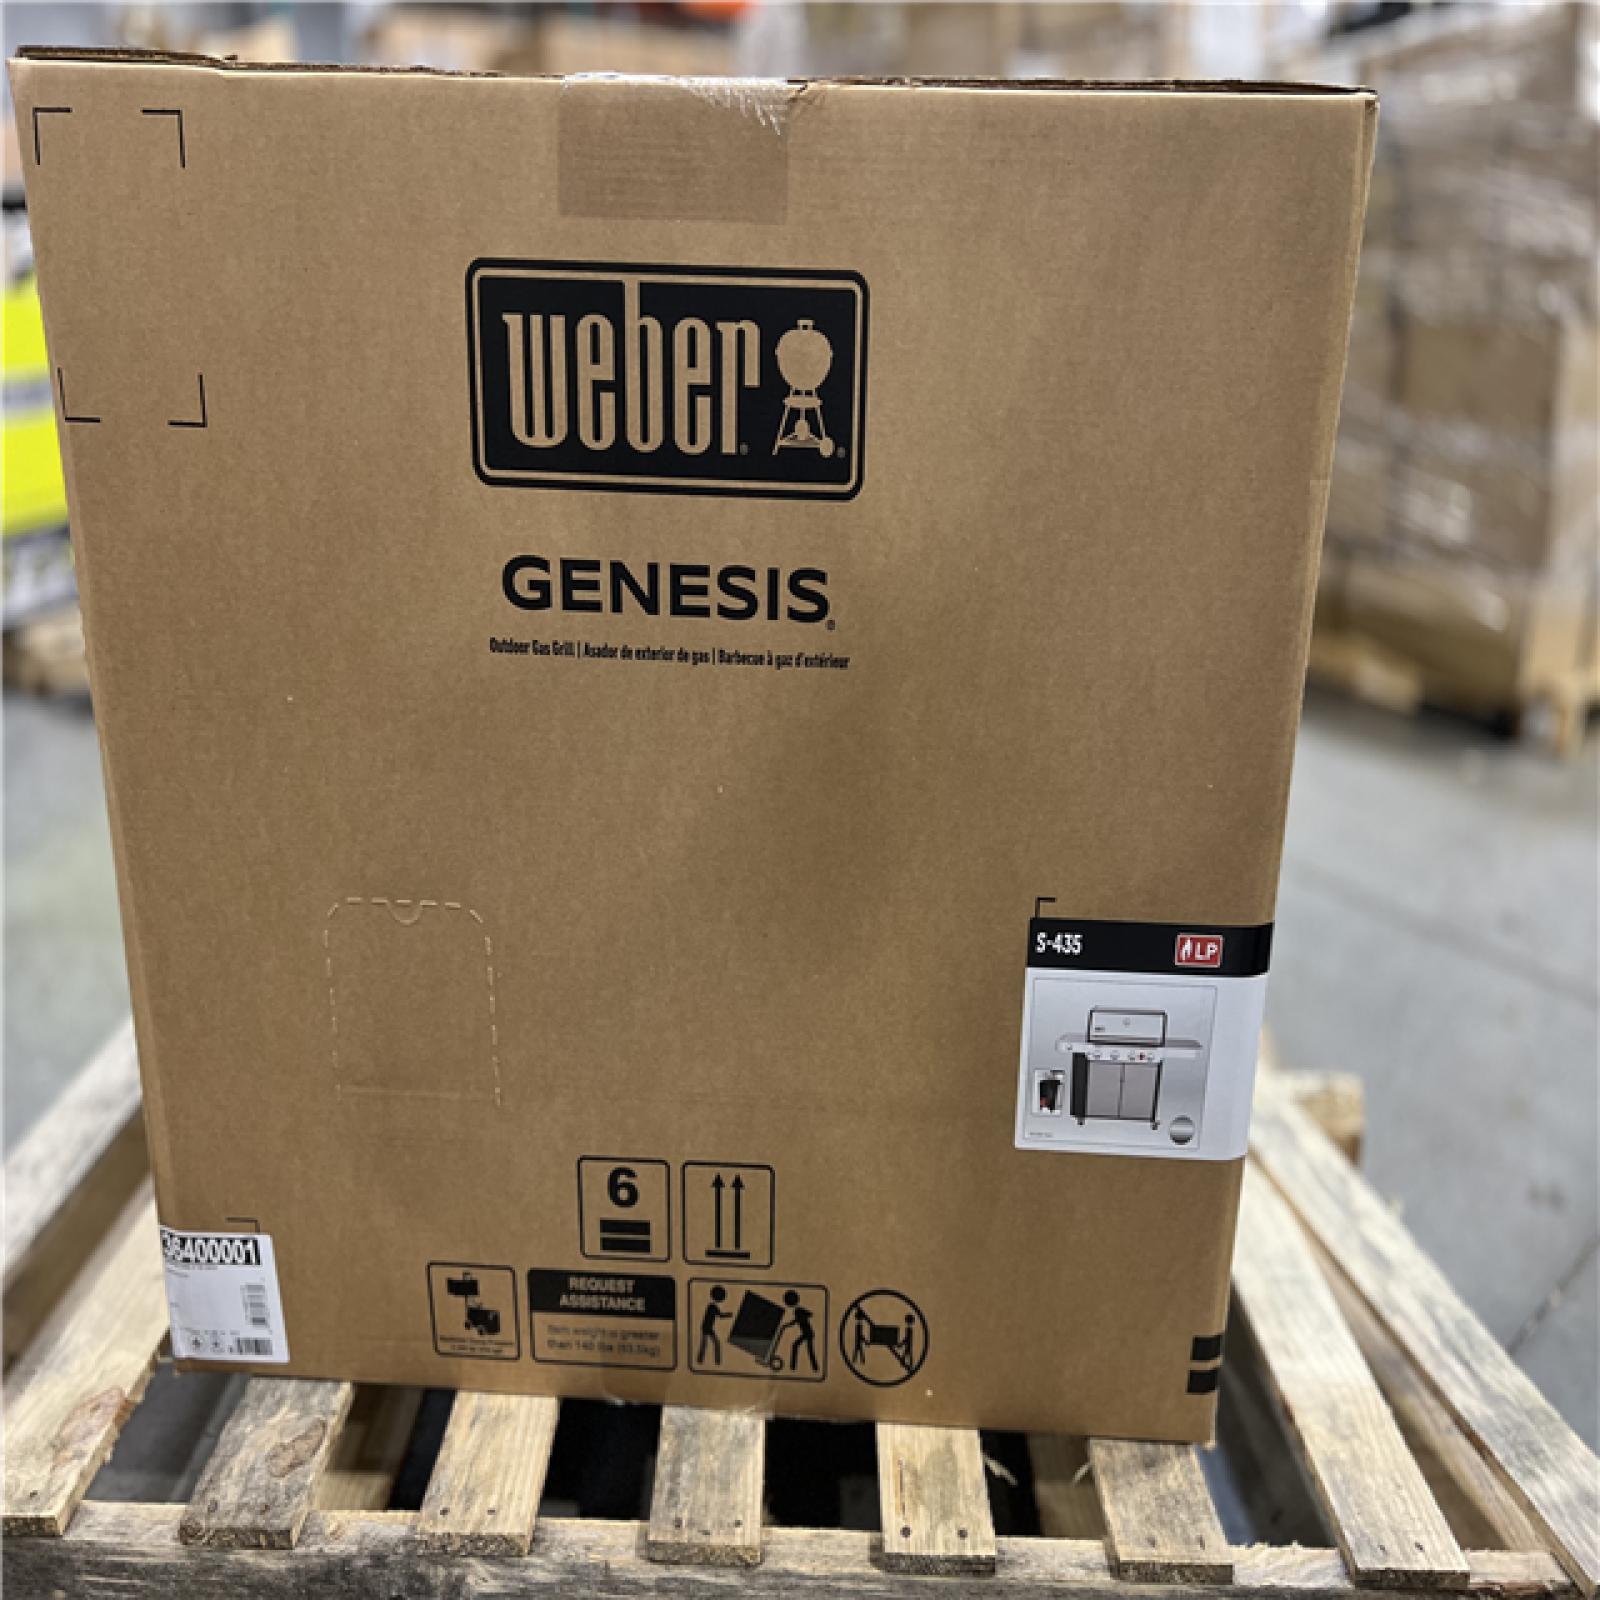 DALLAS LOCATION- NEW! Weber Genesis S-435 4-Burner Liquid Propane Gas Grill in Stainless Steel with Side Burner